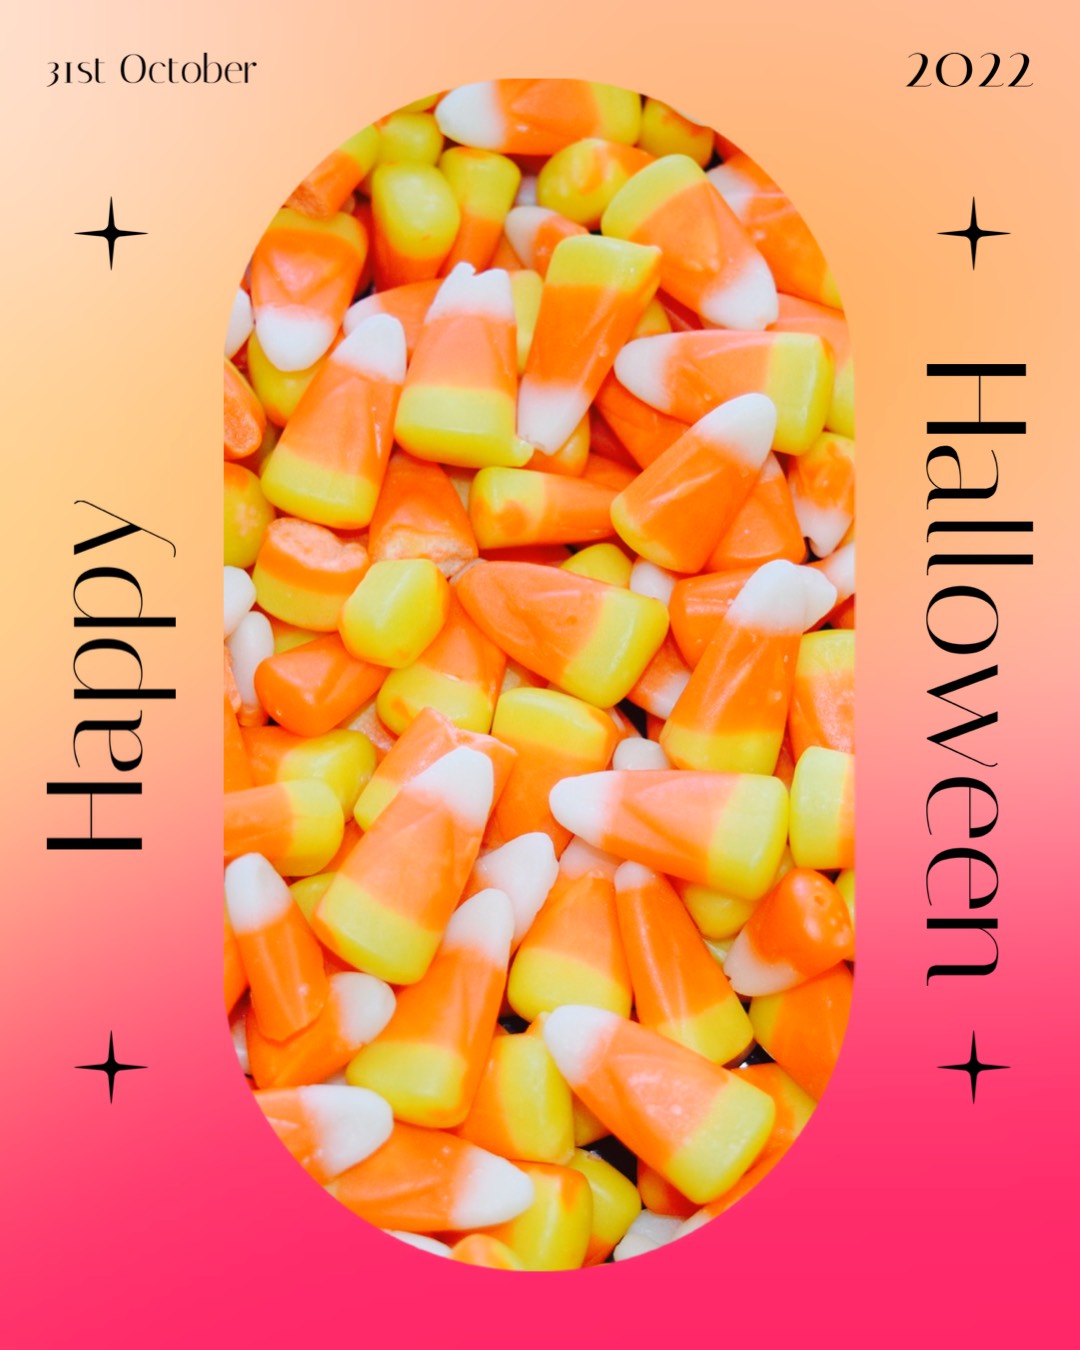 A Picture Of Candy Corn On A Pink And Orange Background Halloween Template